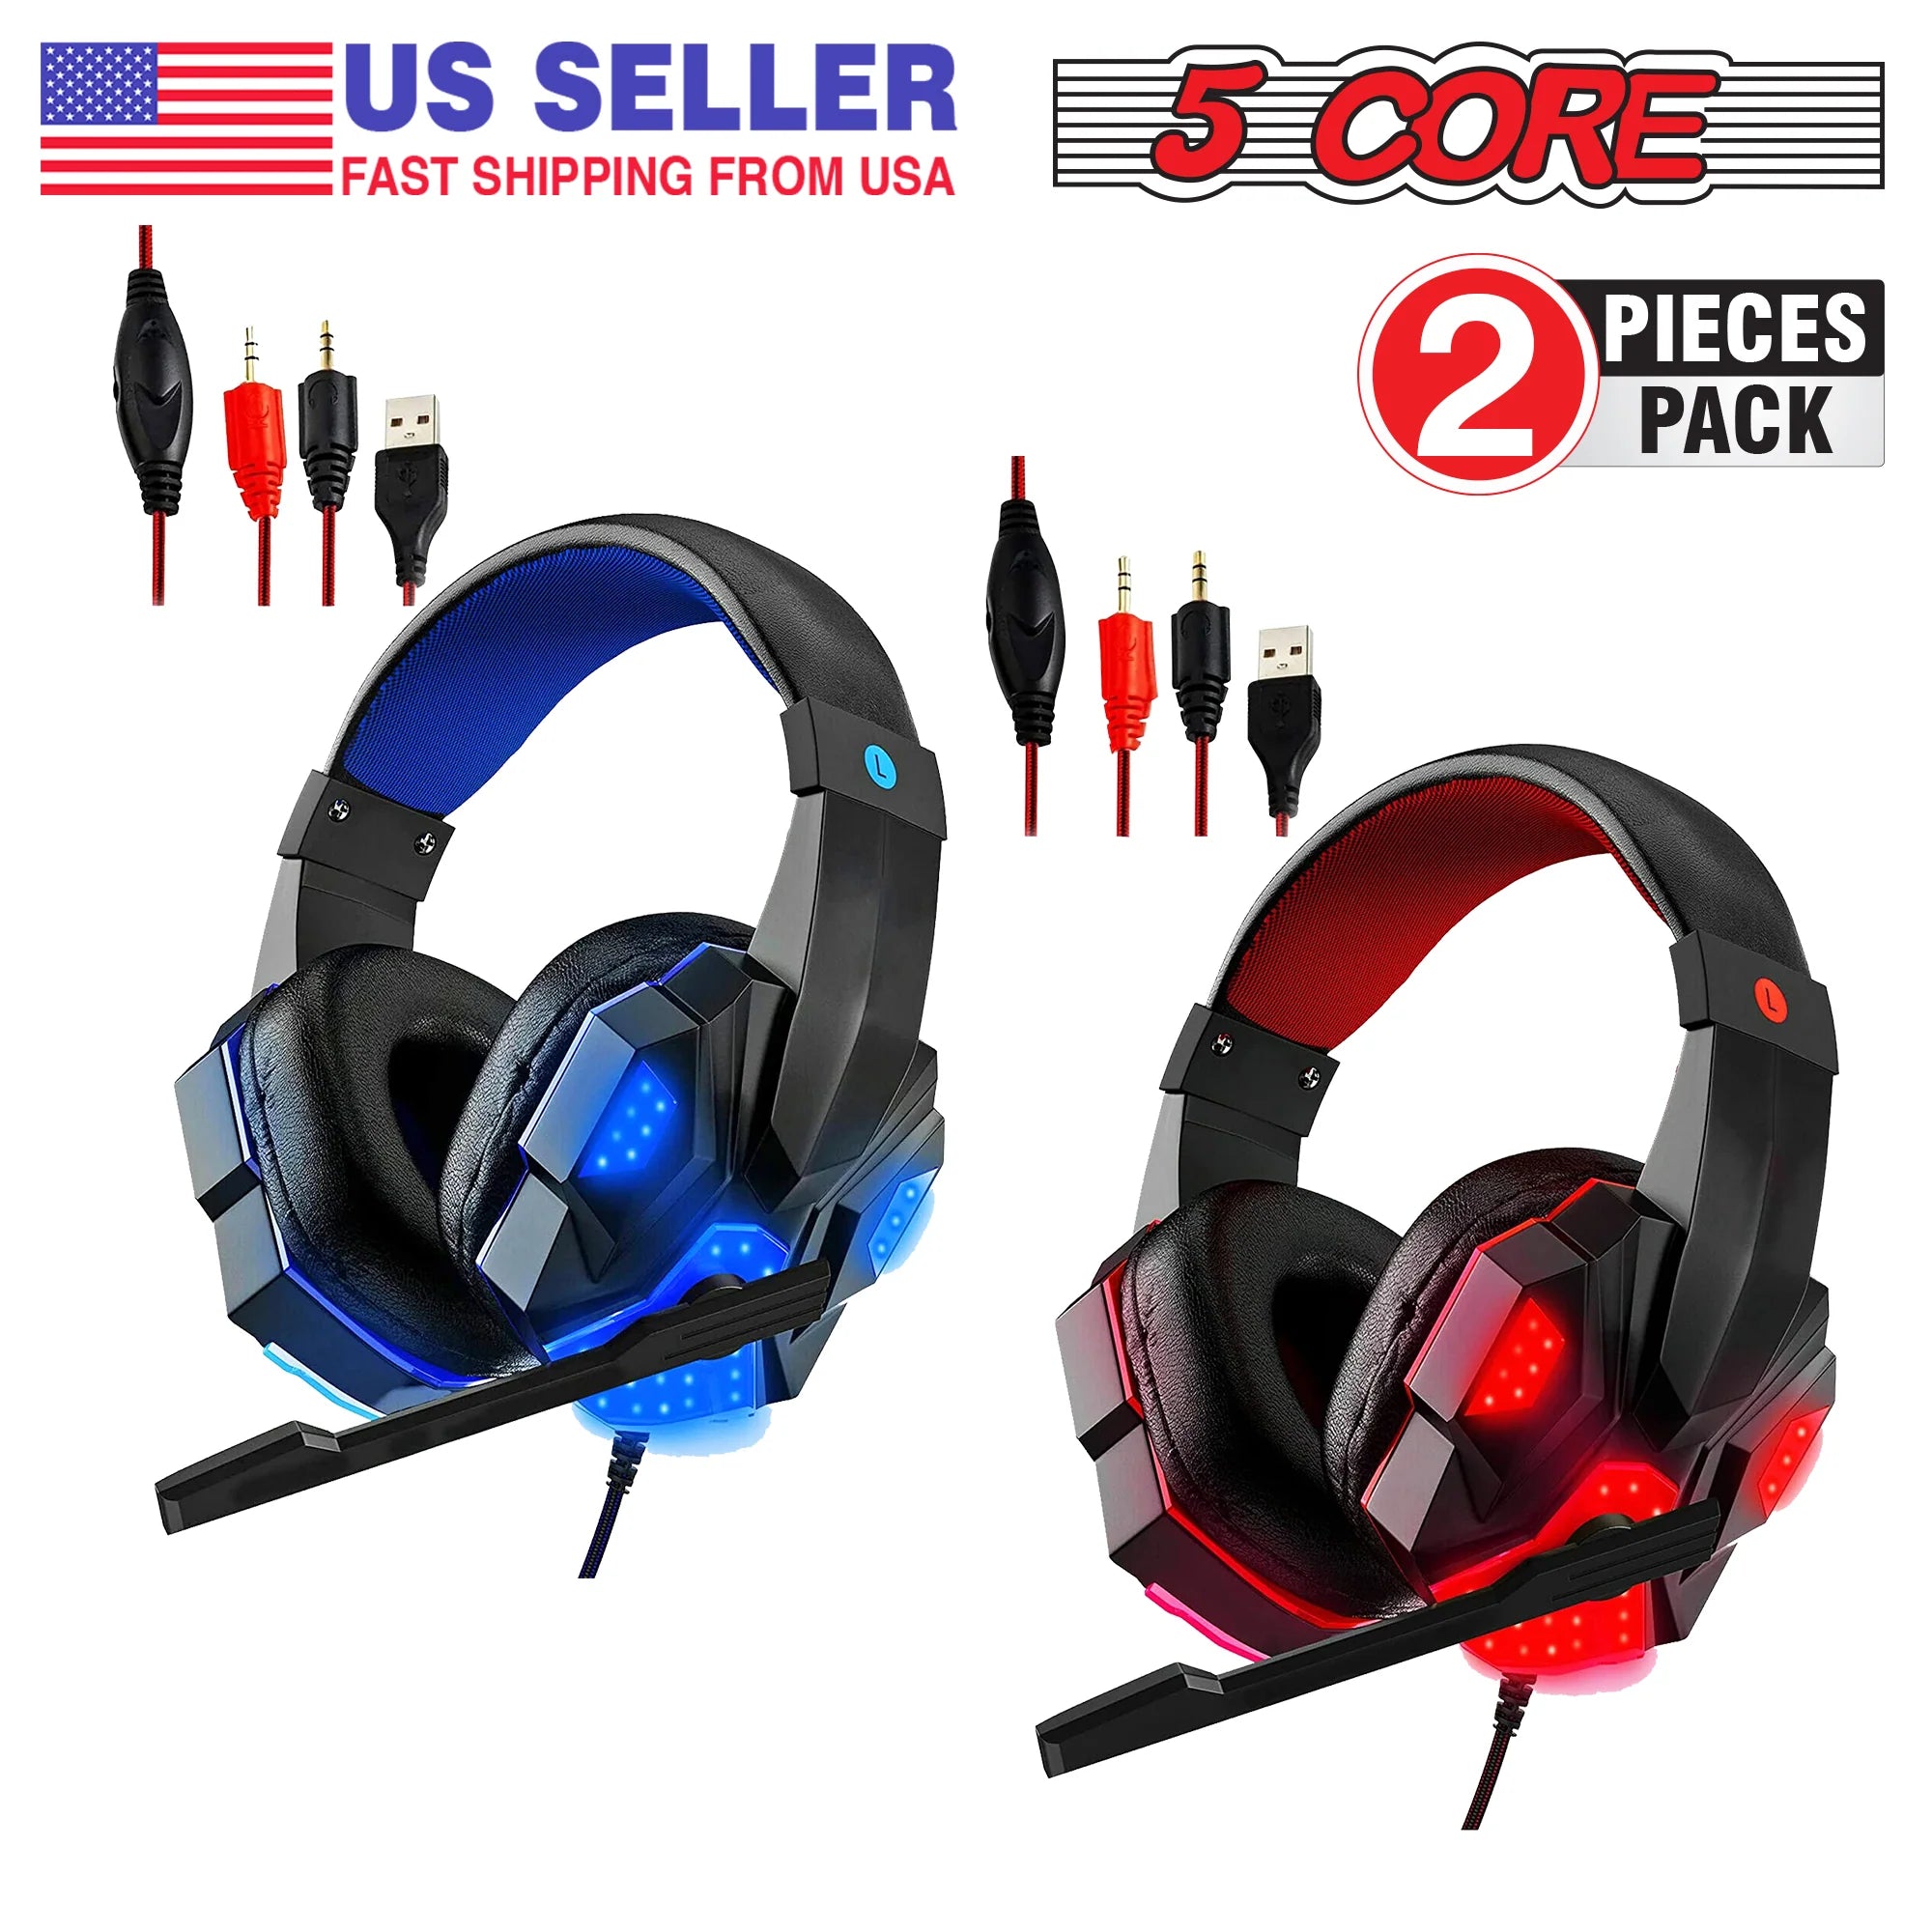 5 Core Gaming Headset 2 Pieces Blue Red PC Gaming Xbox Headset Premium Gaming Wired Headsets with LED Light Mic Gaming Accessories for Console Laptop Computer Games Perfect Gamer Gifts - HDP GM1 R+B